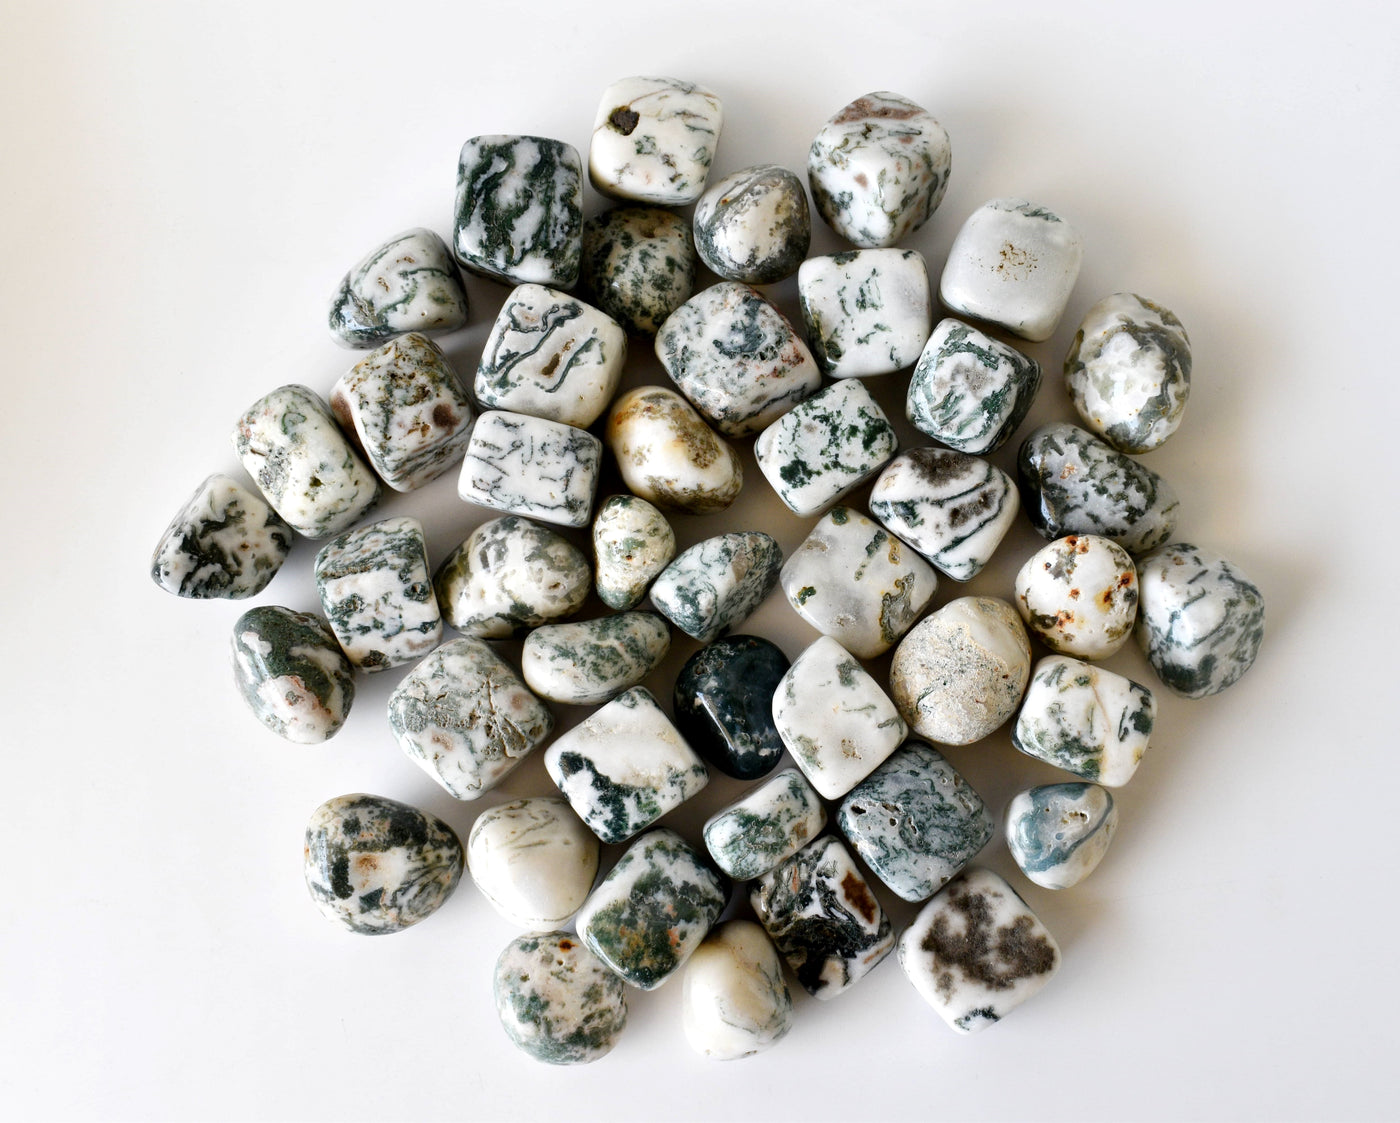 Tree Agate Tumbled Crystals (Knowledge and Trust)